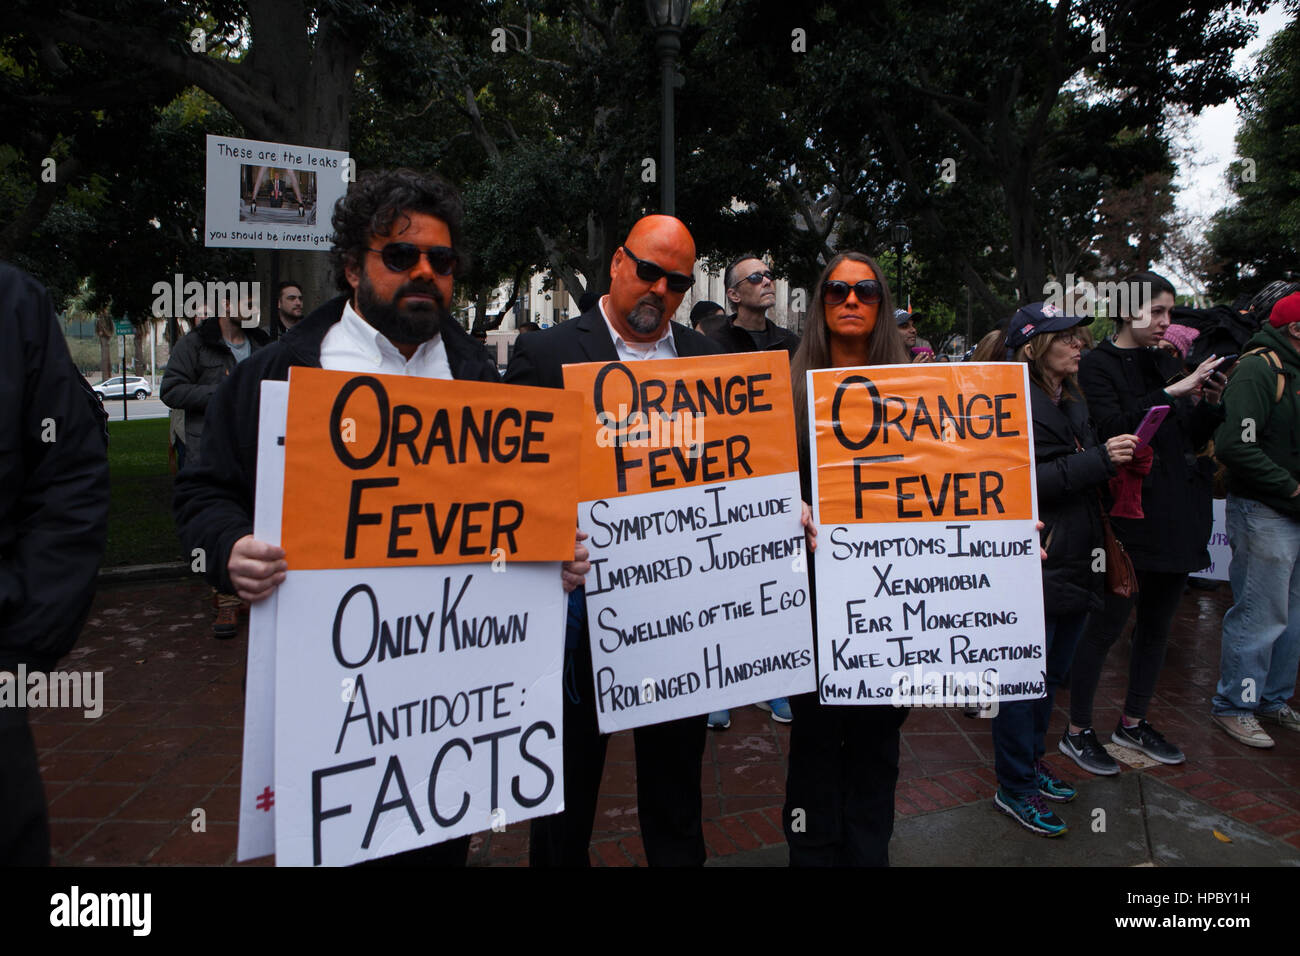 Los Angeles, USA. 20 February, 2017. Protestors with faces painted orange with signs that list the symptoms of 'Orange Fever' gather at Los Angeles city hall for ‘Not Presidents Day’ rally. Zack Clark/Alamay Live News Stock Photo